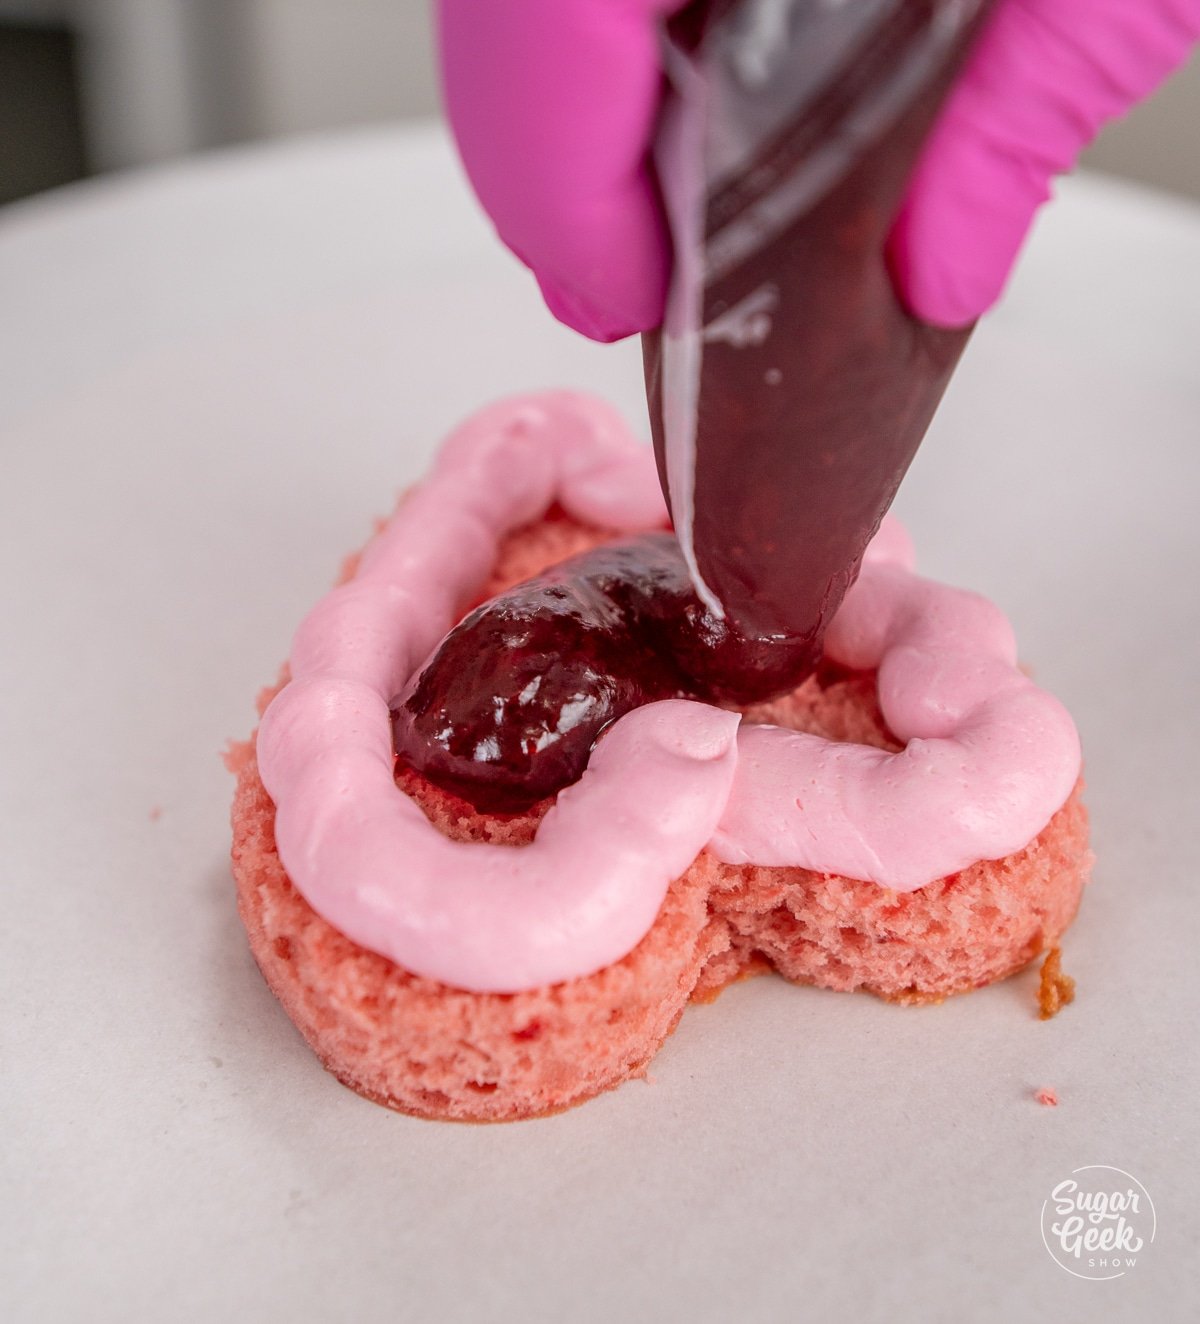 hands squeezing a piping bag of strawberry filling into a cake